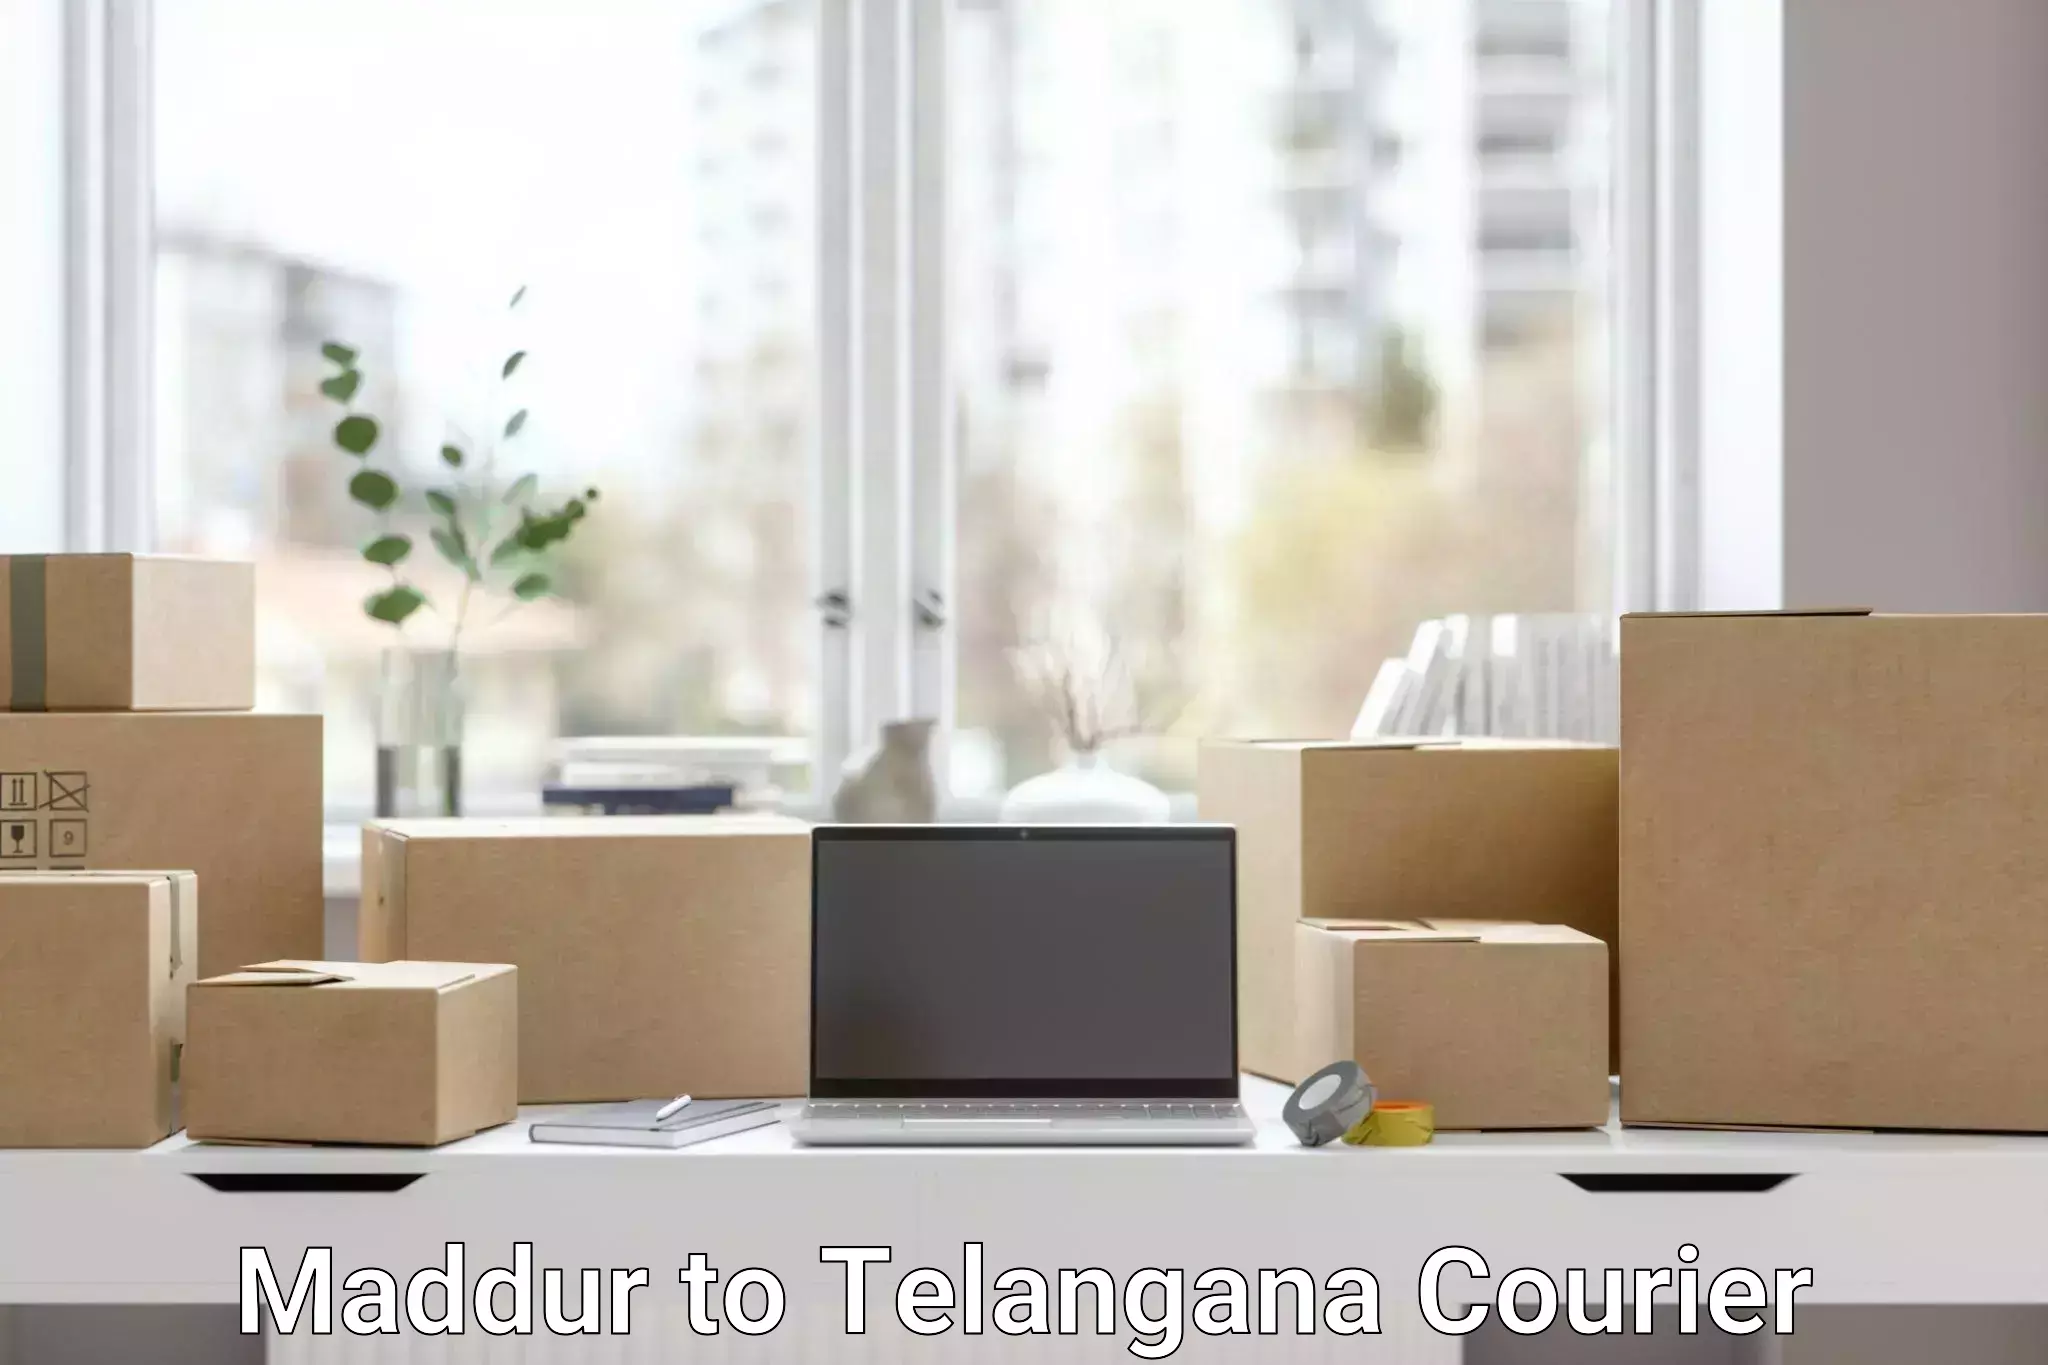 Parcel service for businesses Maddur to Miryalaguda